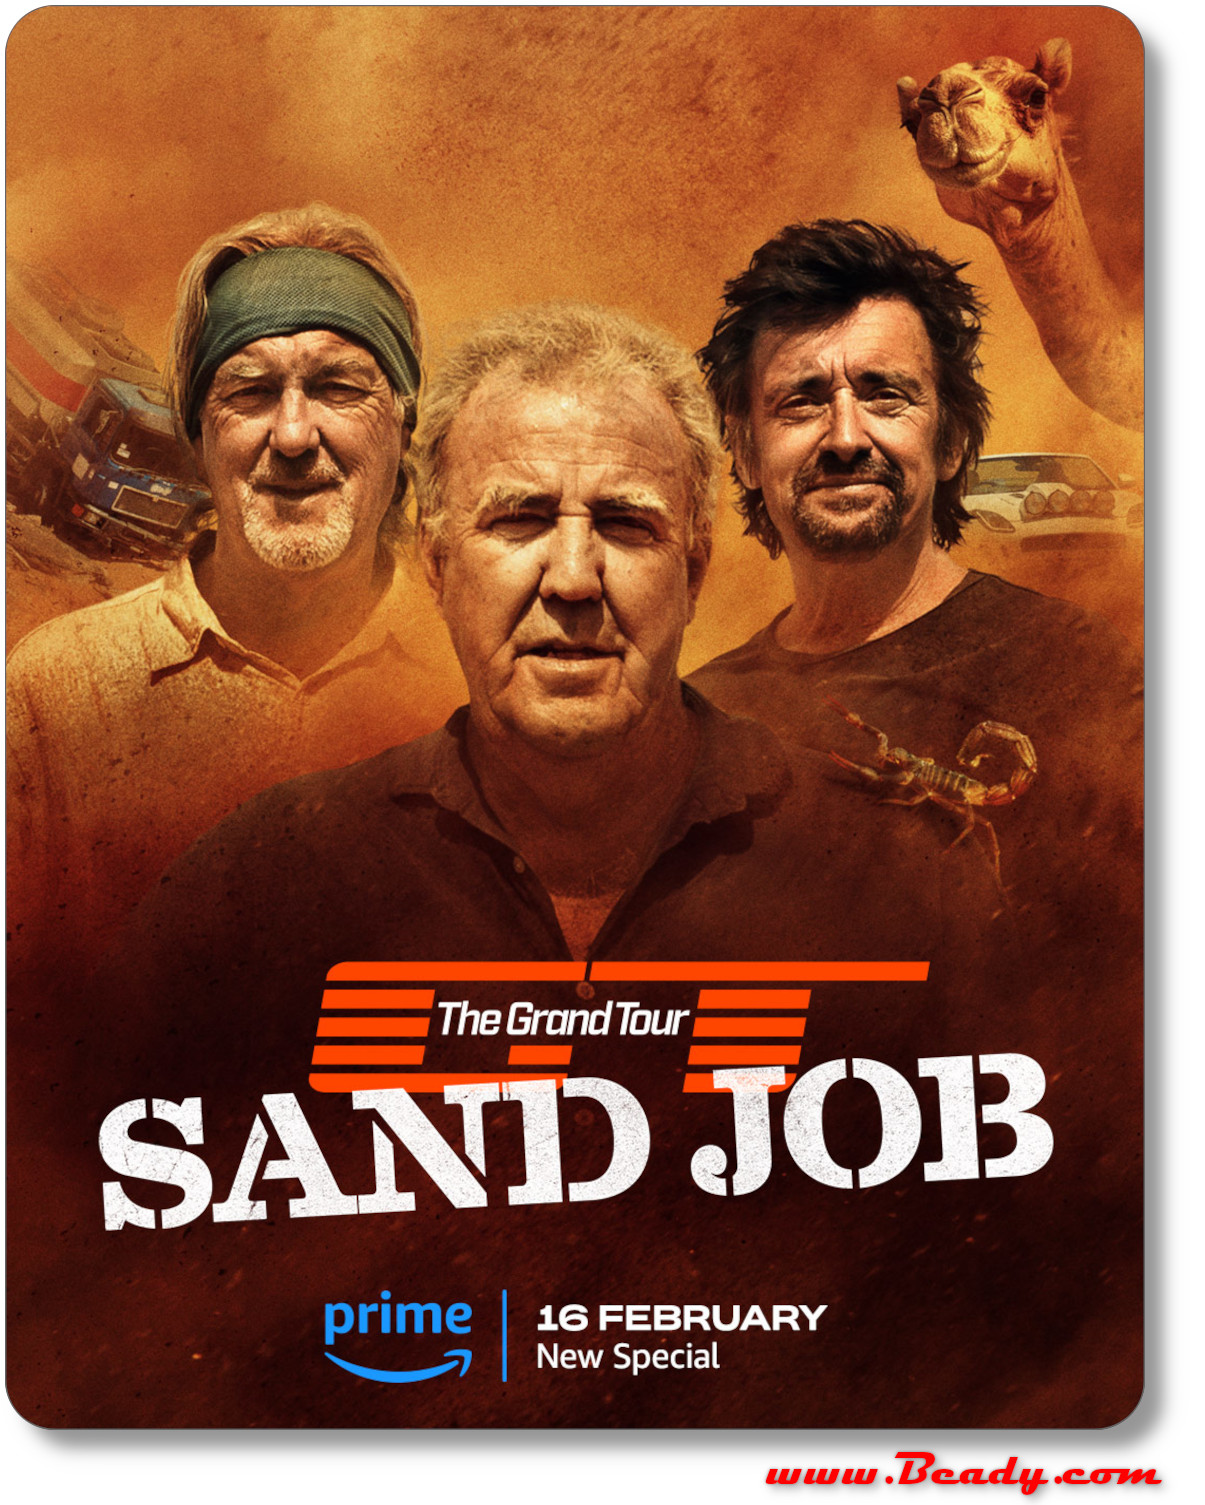 the Grand tour SAND JOB poster, Clarkson, Hammond and May race 3 cars built by Beady race in the Sahara